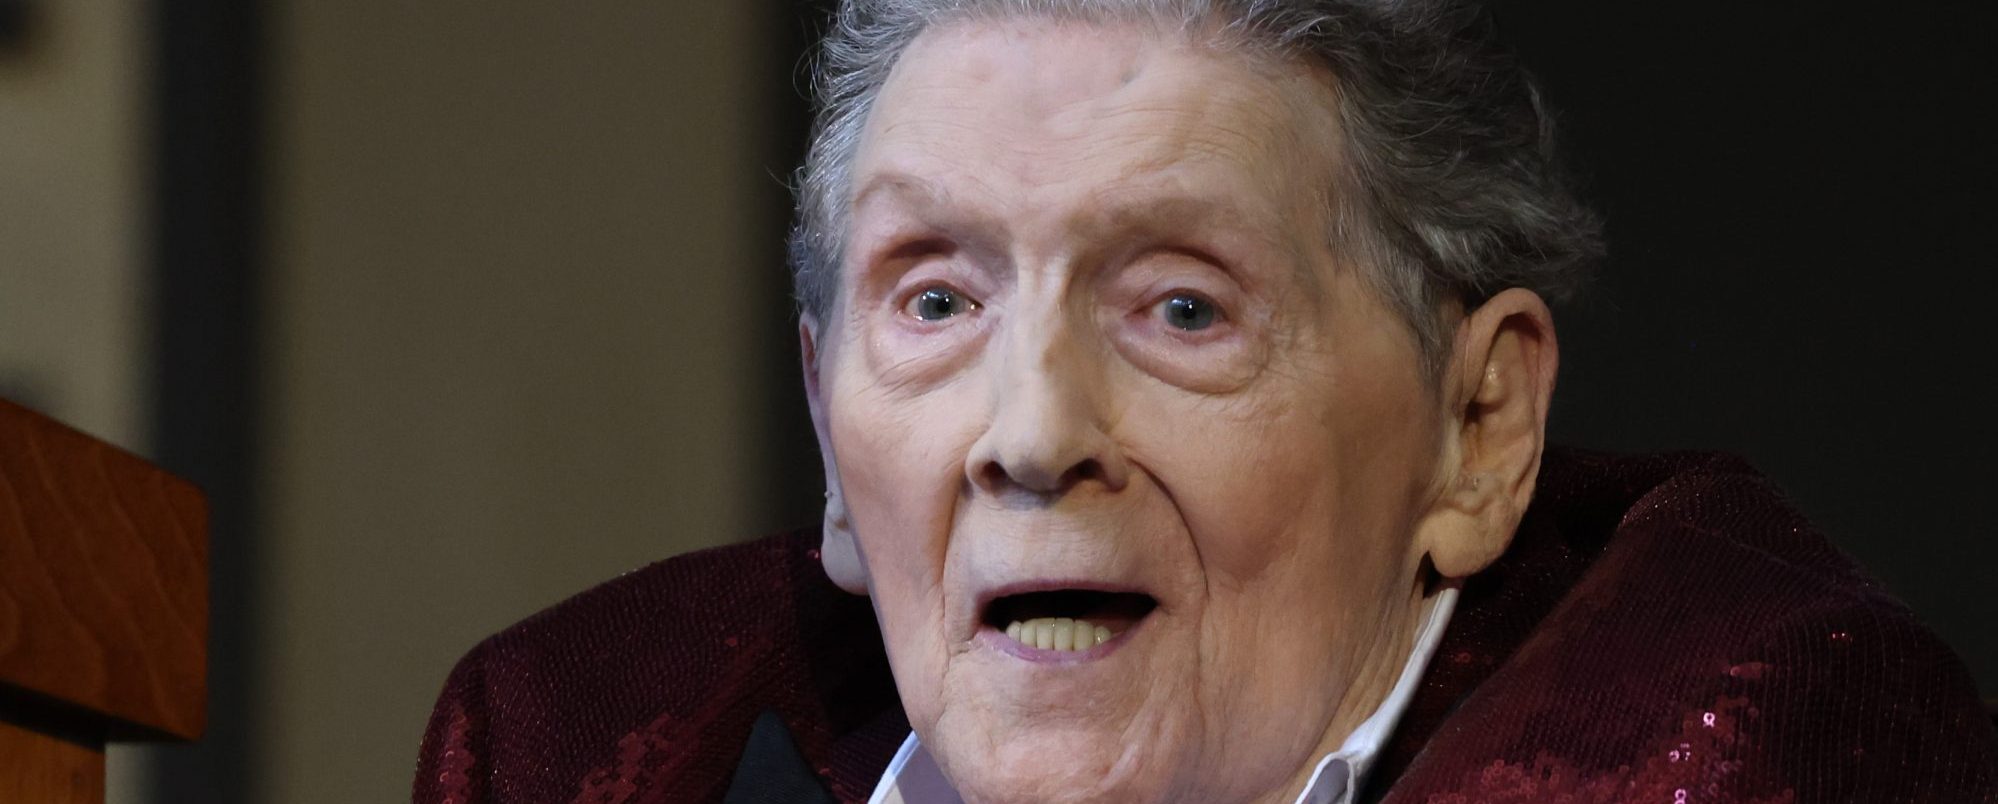 Jerry Lee Lewis Funeral and Public Memorial Service Details Revealed